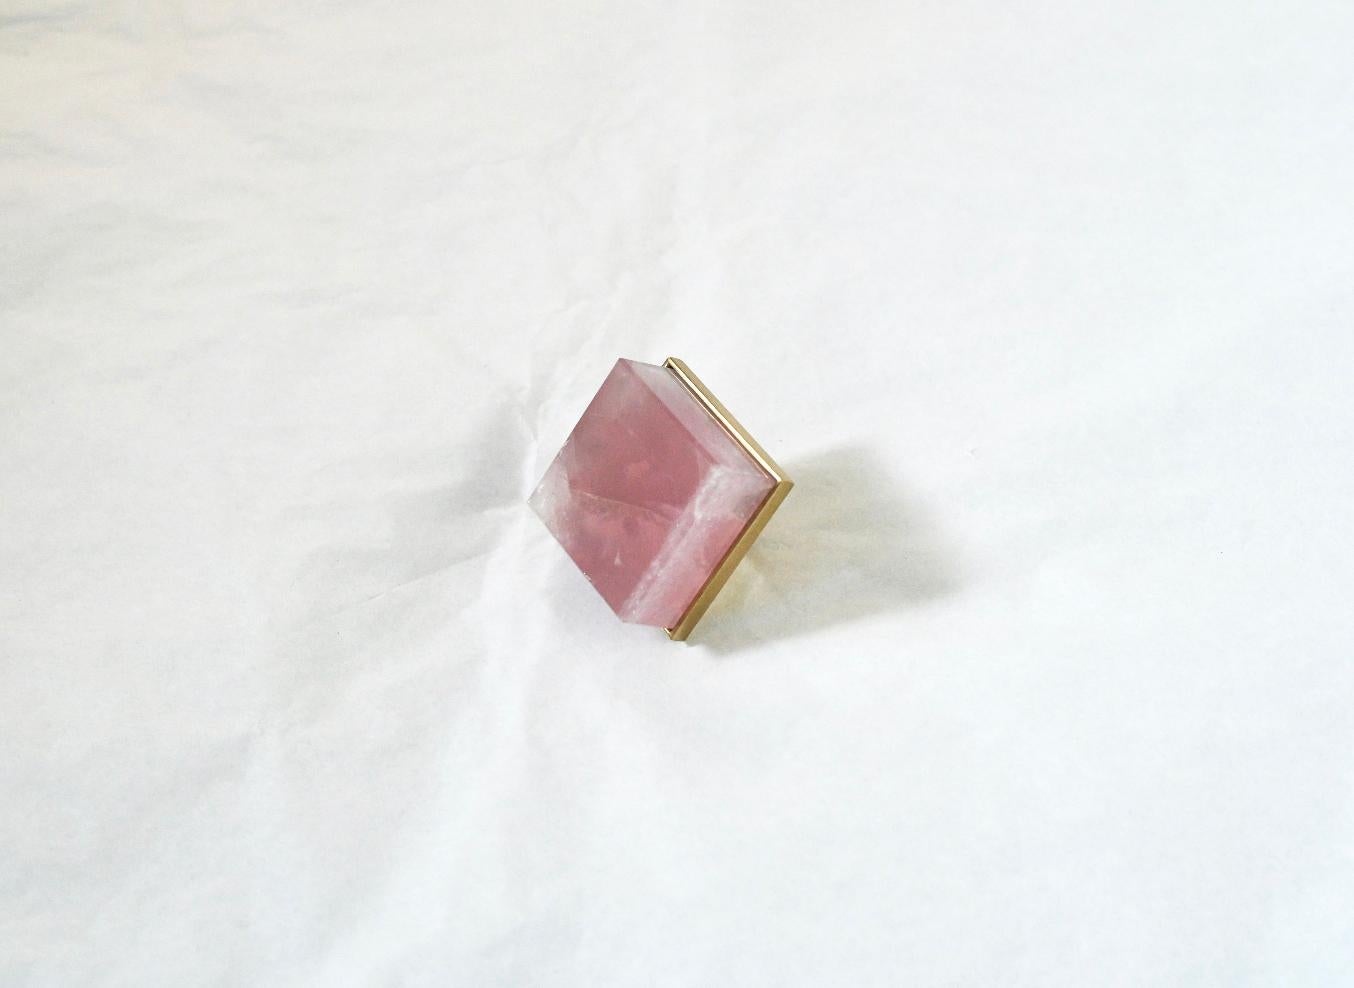 Cubic form rose rock crystal quartz knob with polished brass base. Created by Phoenix Gallery, NYC.
Custom size and finish upon request.